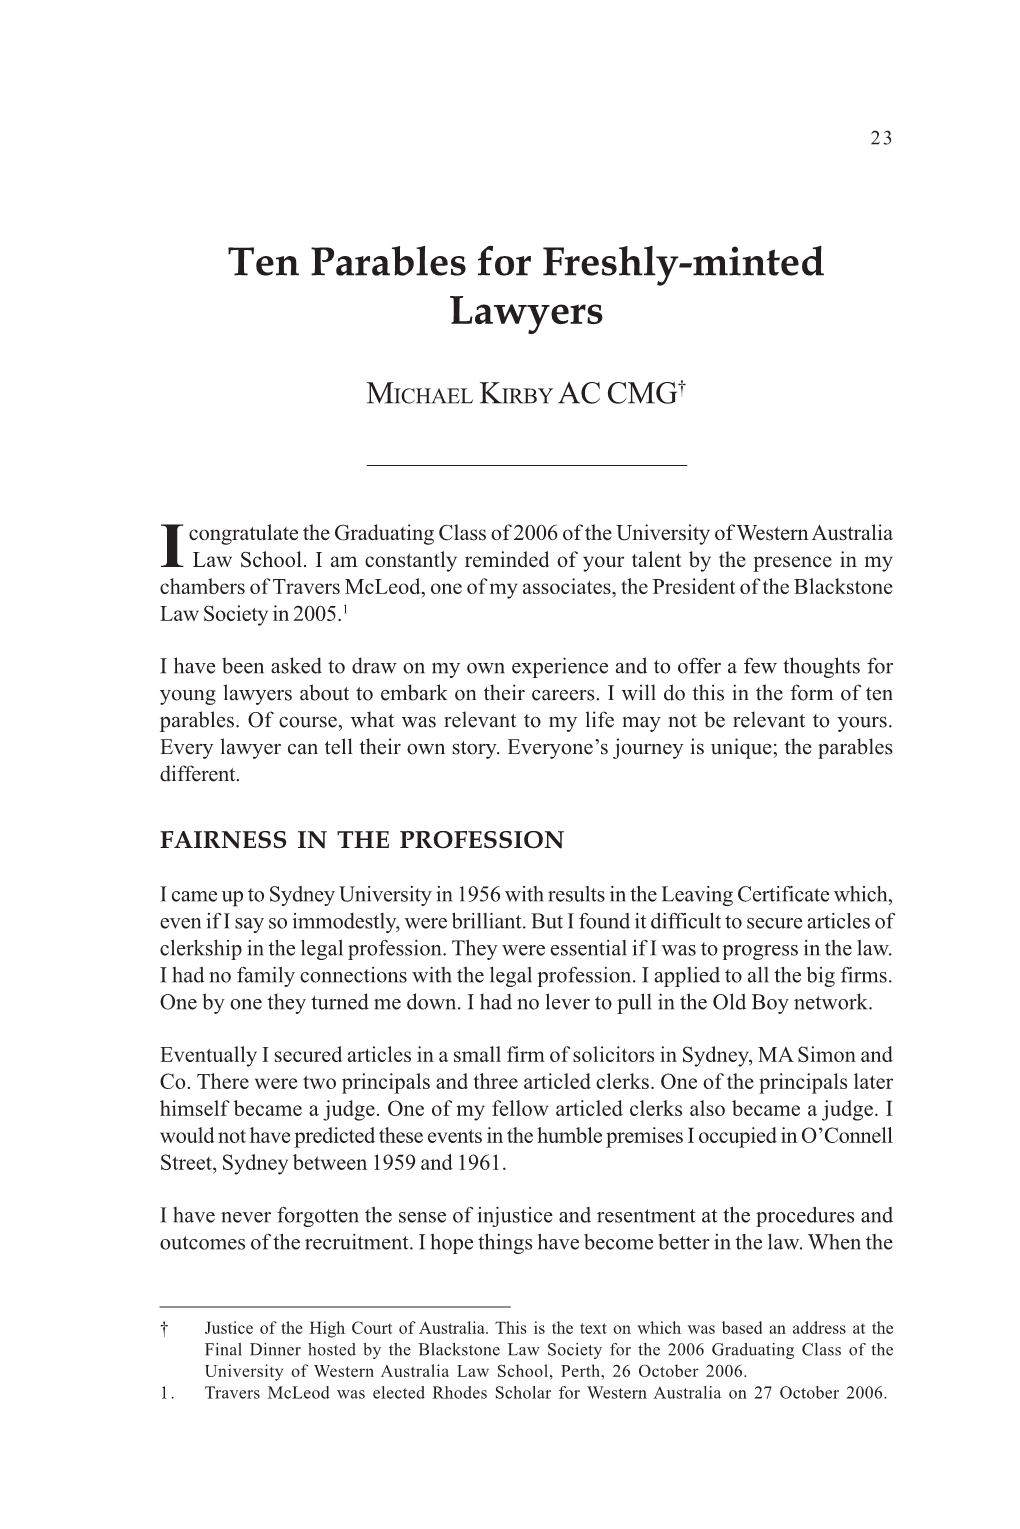 Ten Parables for Freshly-Minted Lawyers 23